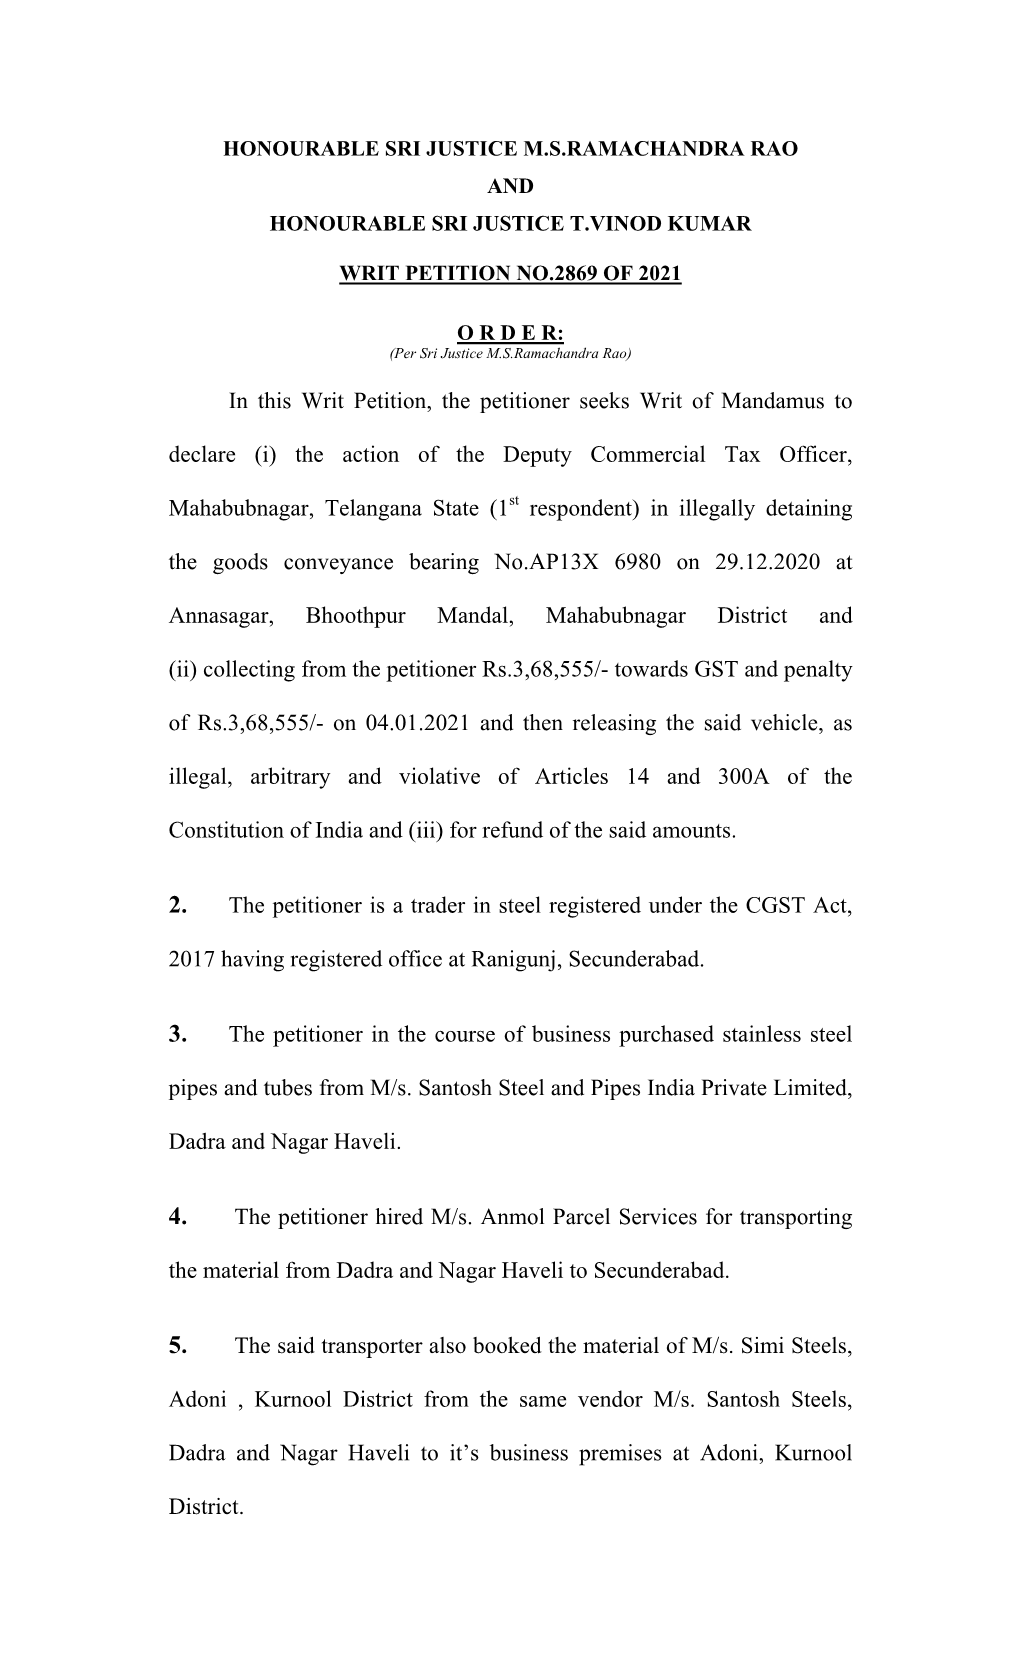 In This Writ Petition, the Petitioner Seeks Writ of Mandamus To